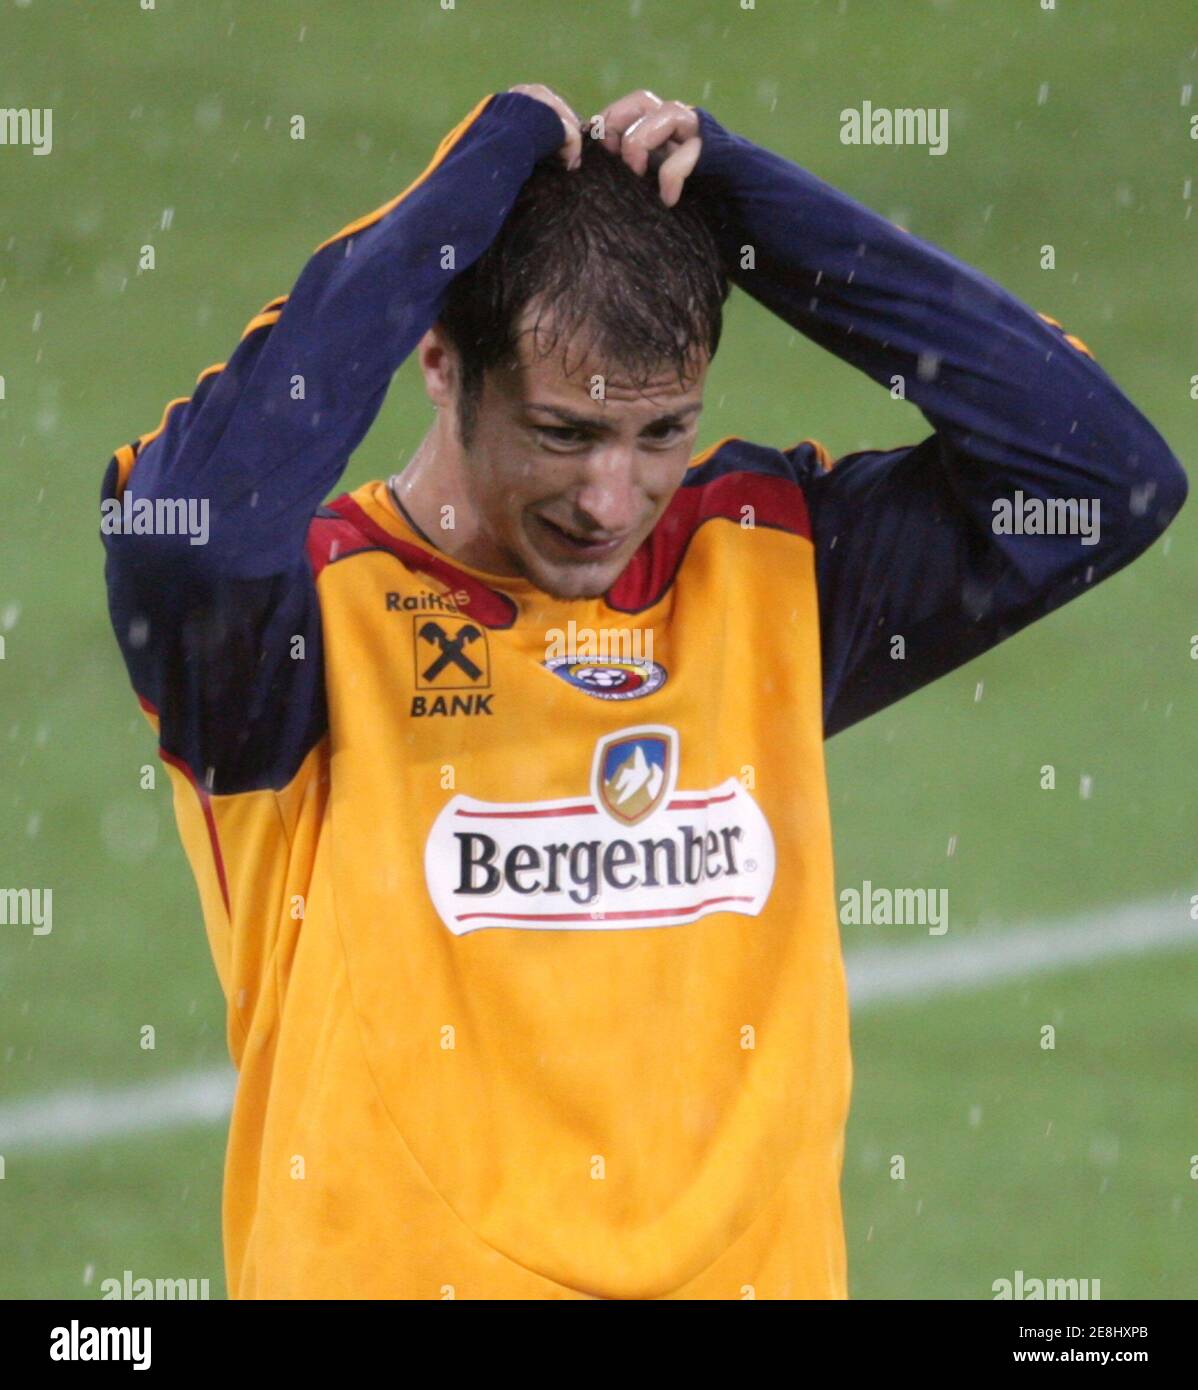 Romania's national soccer player Radu Stefan gestures during a public training session for the Euro 2008 soccer tournament in St. Gallen, June 2, 2008. REUTERS/Miro Kuzmanovic (SWITZERLAND) (EURO 2008 PREVIEW) Stock Photo